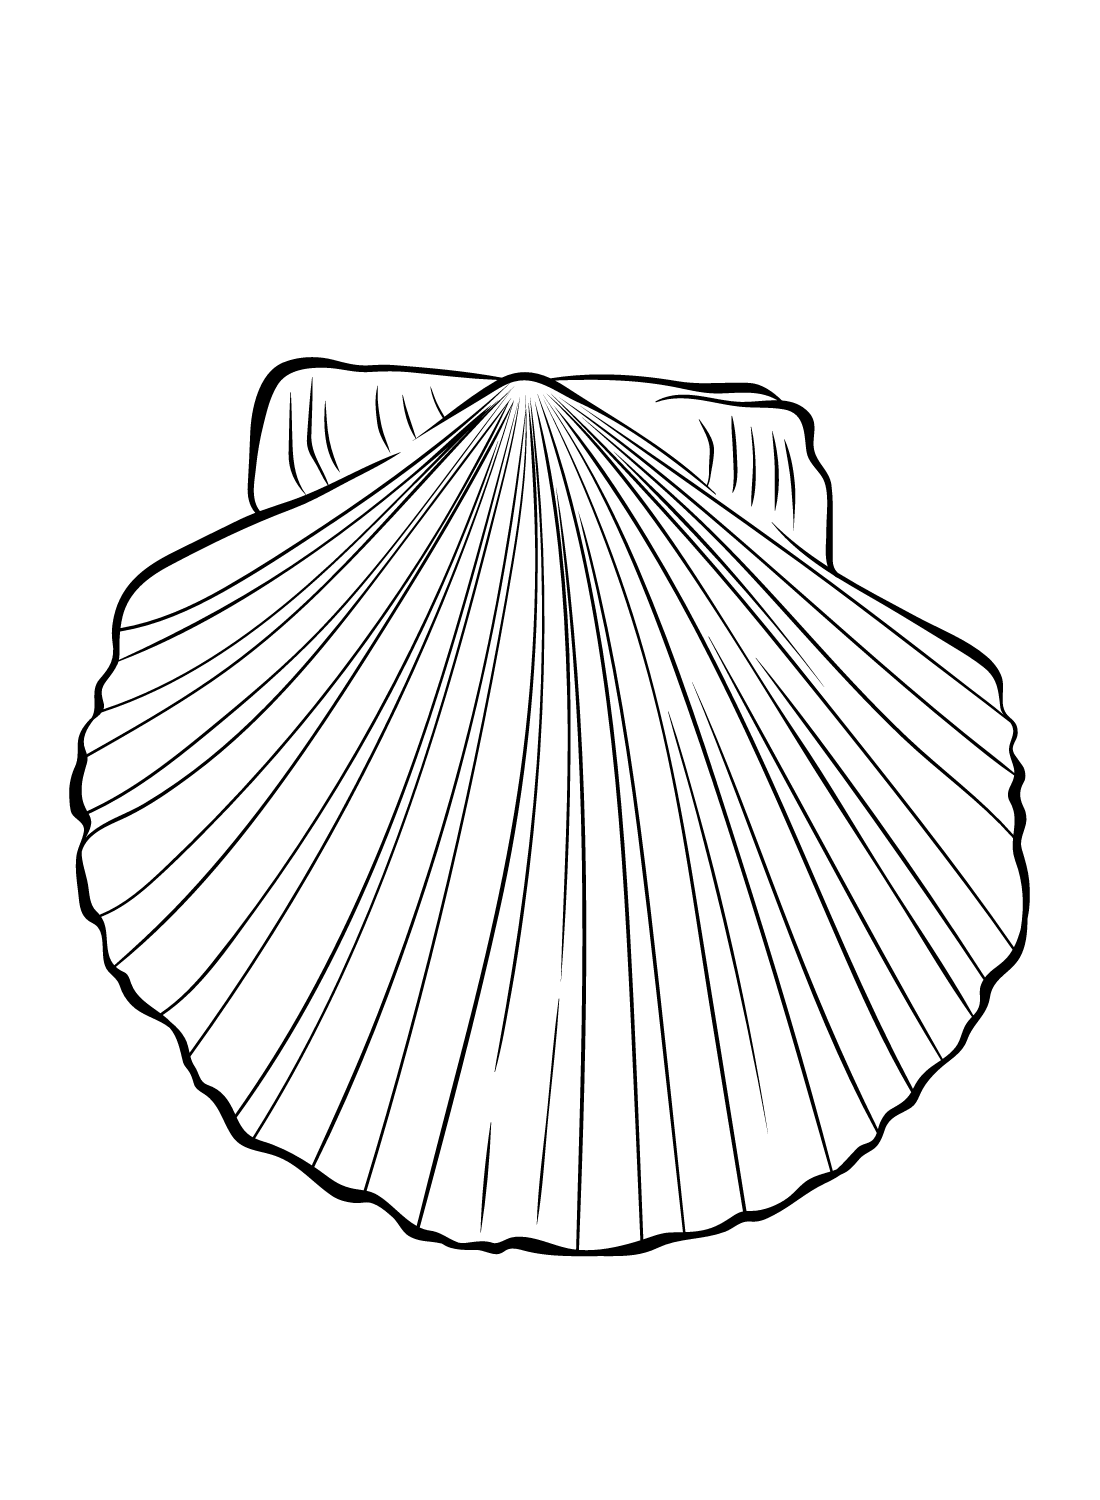 Scallop Pictures Coloring Page